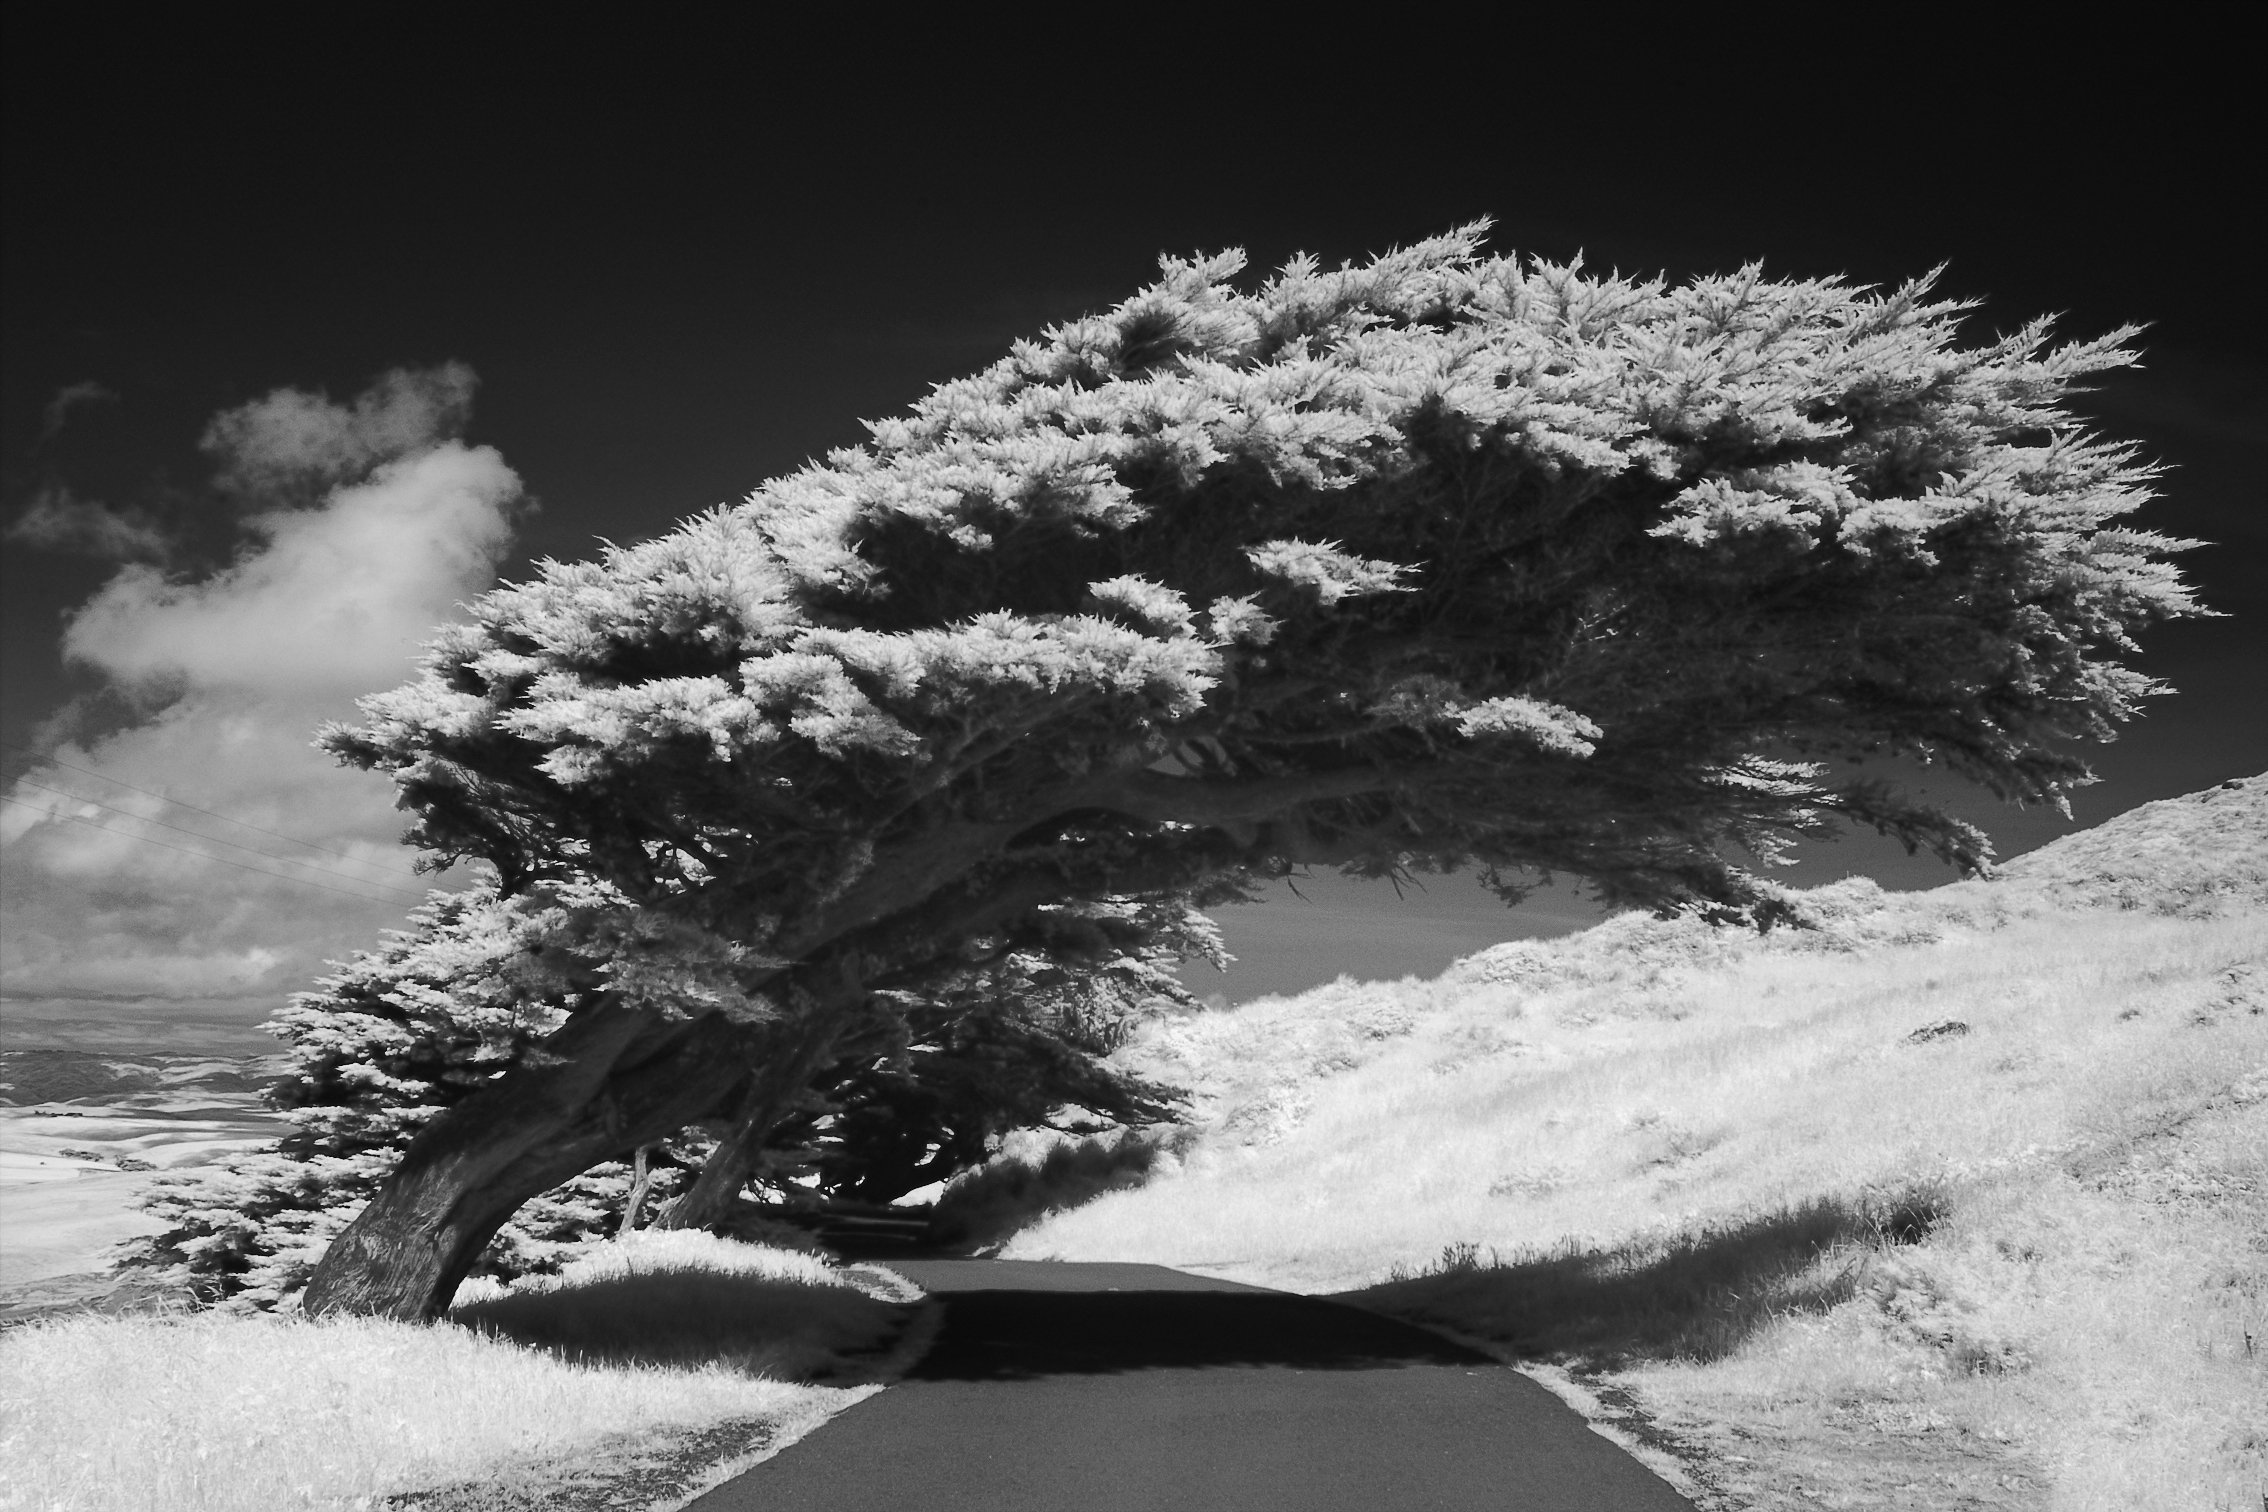 A tree growing near the ocean over a road